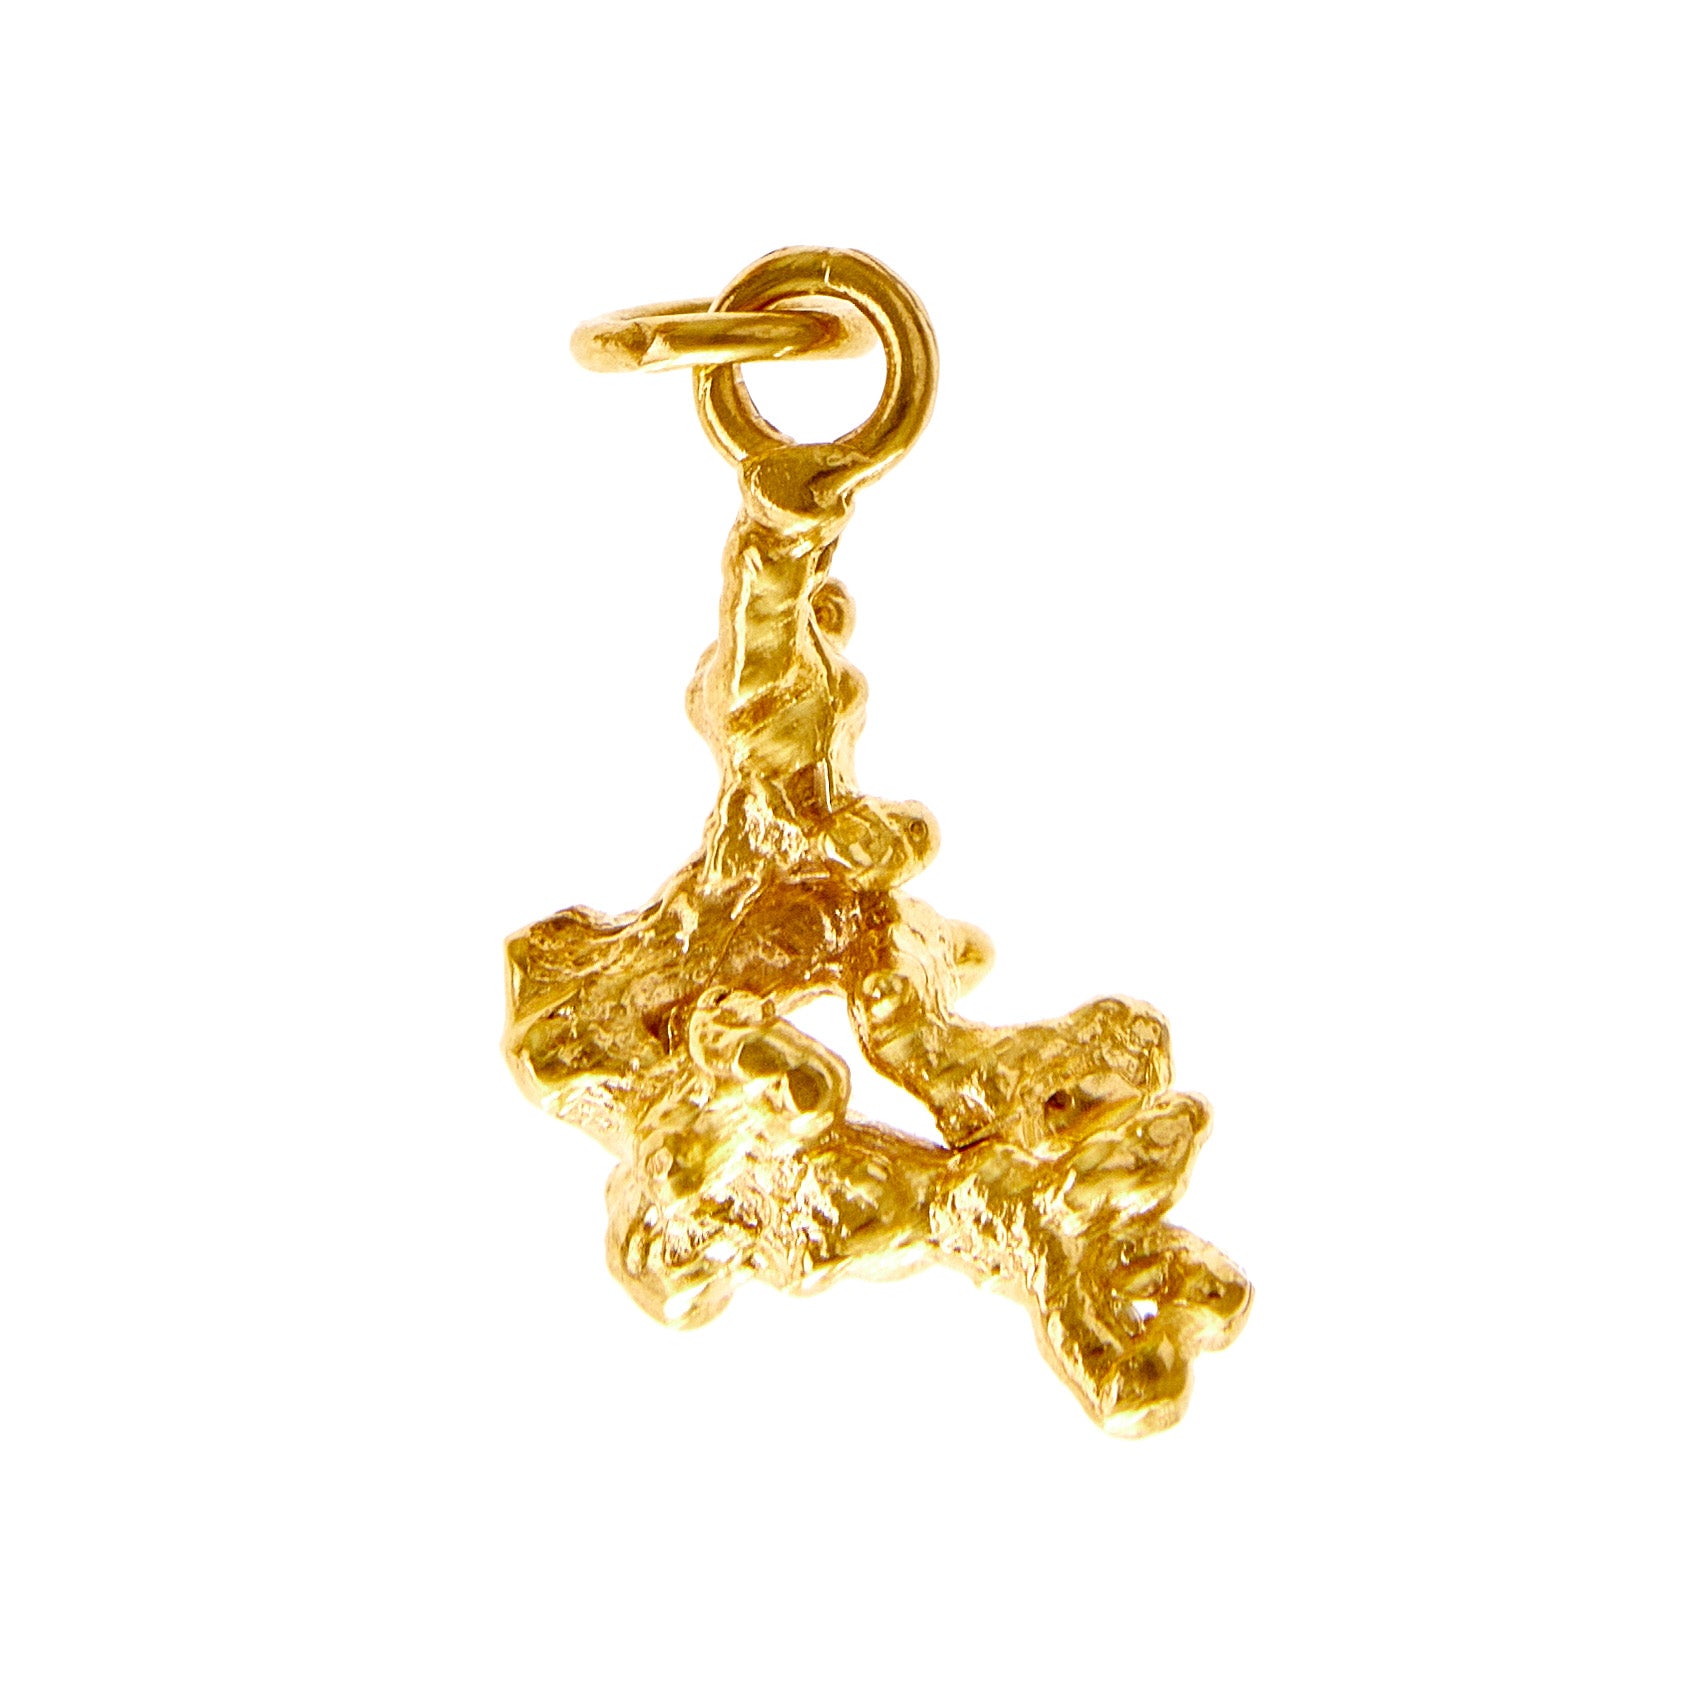 Corallia Speos Charm - Gold Vermeil Recycled Silver